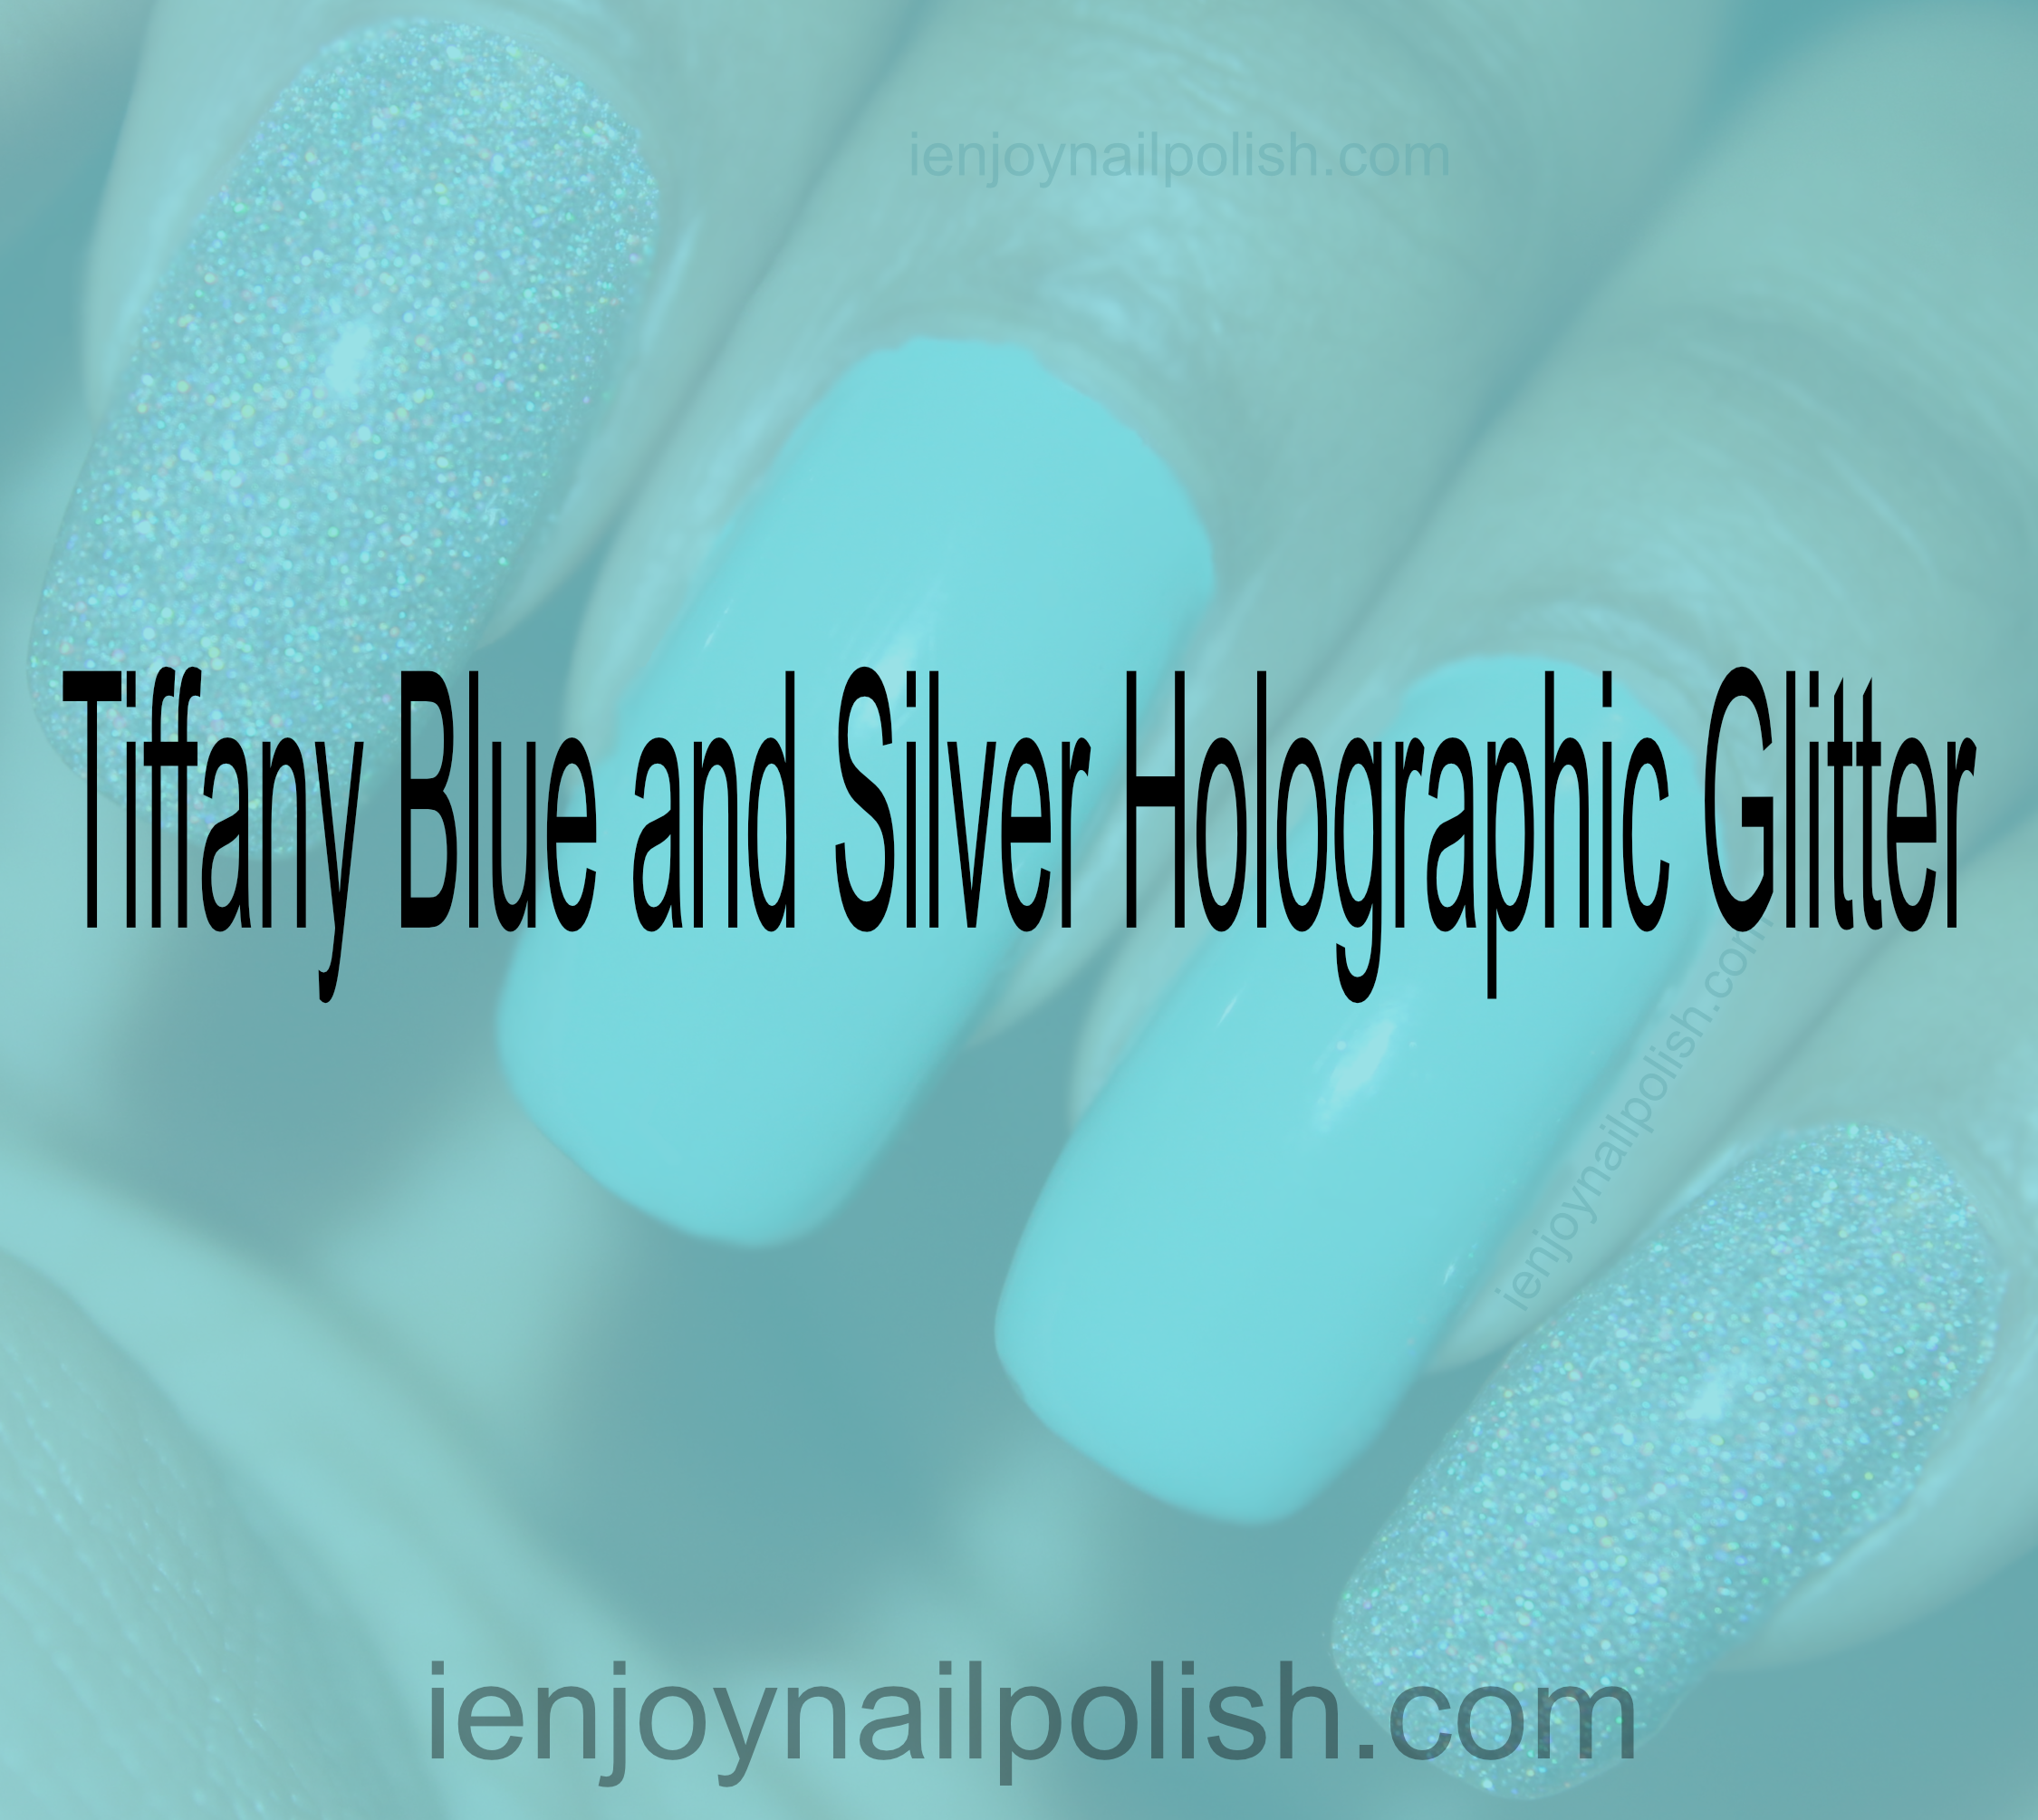 Tiffany Blue and Silver Holographic Glitter